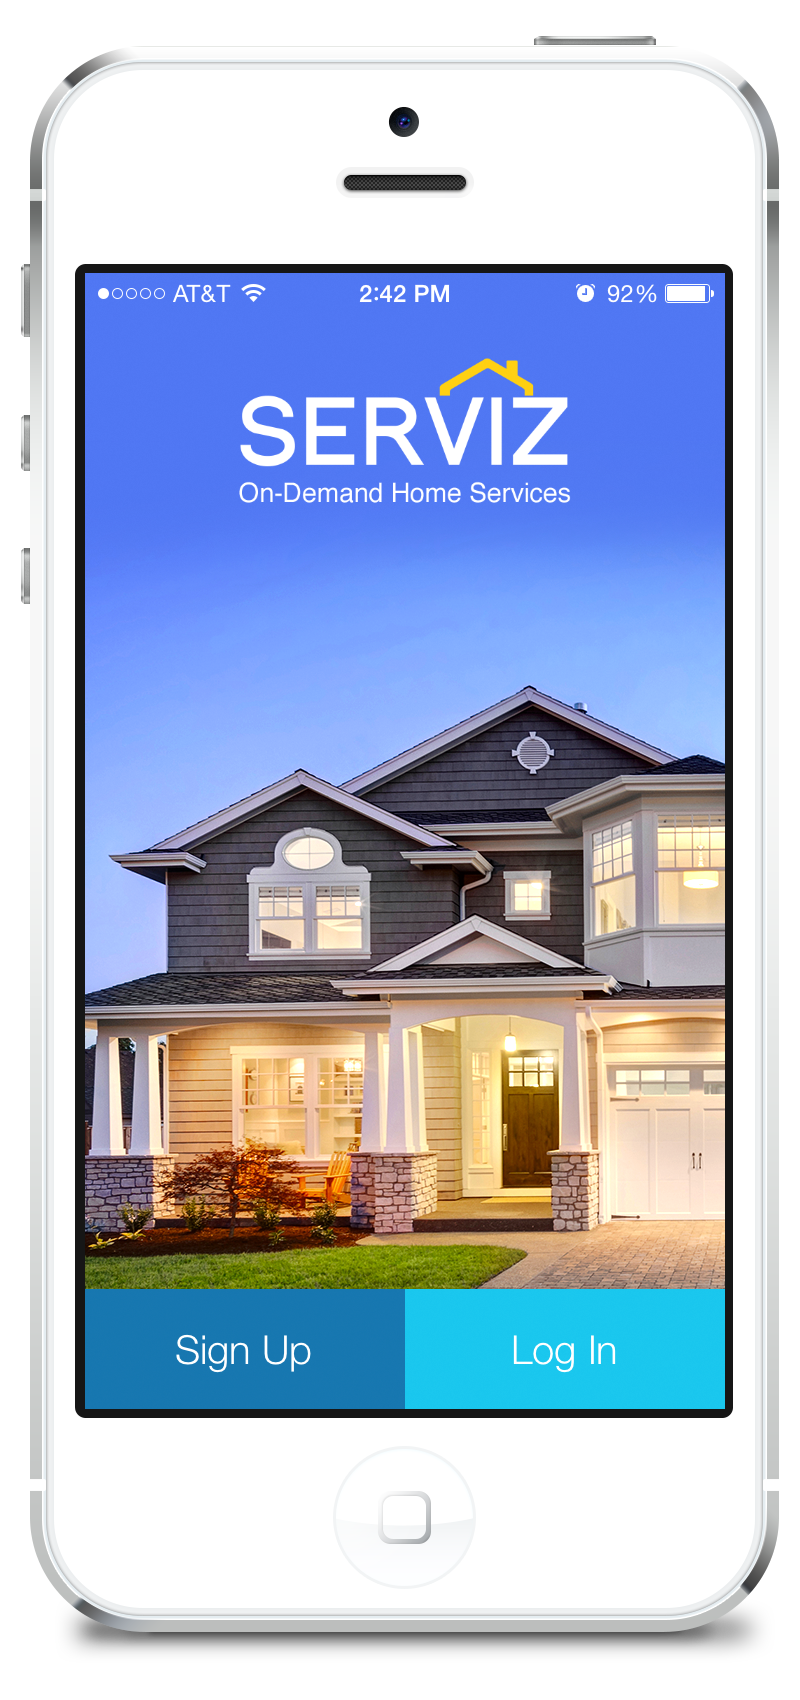 SERVIZ is an on-demand local services company that offers a safer, faster, easier, and more transparent way to book and buy home services online.